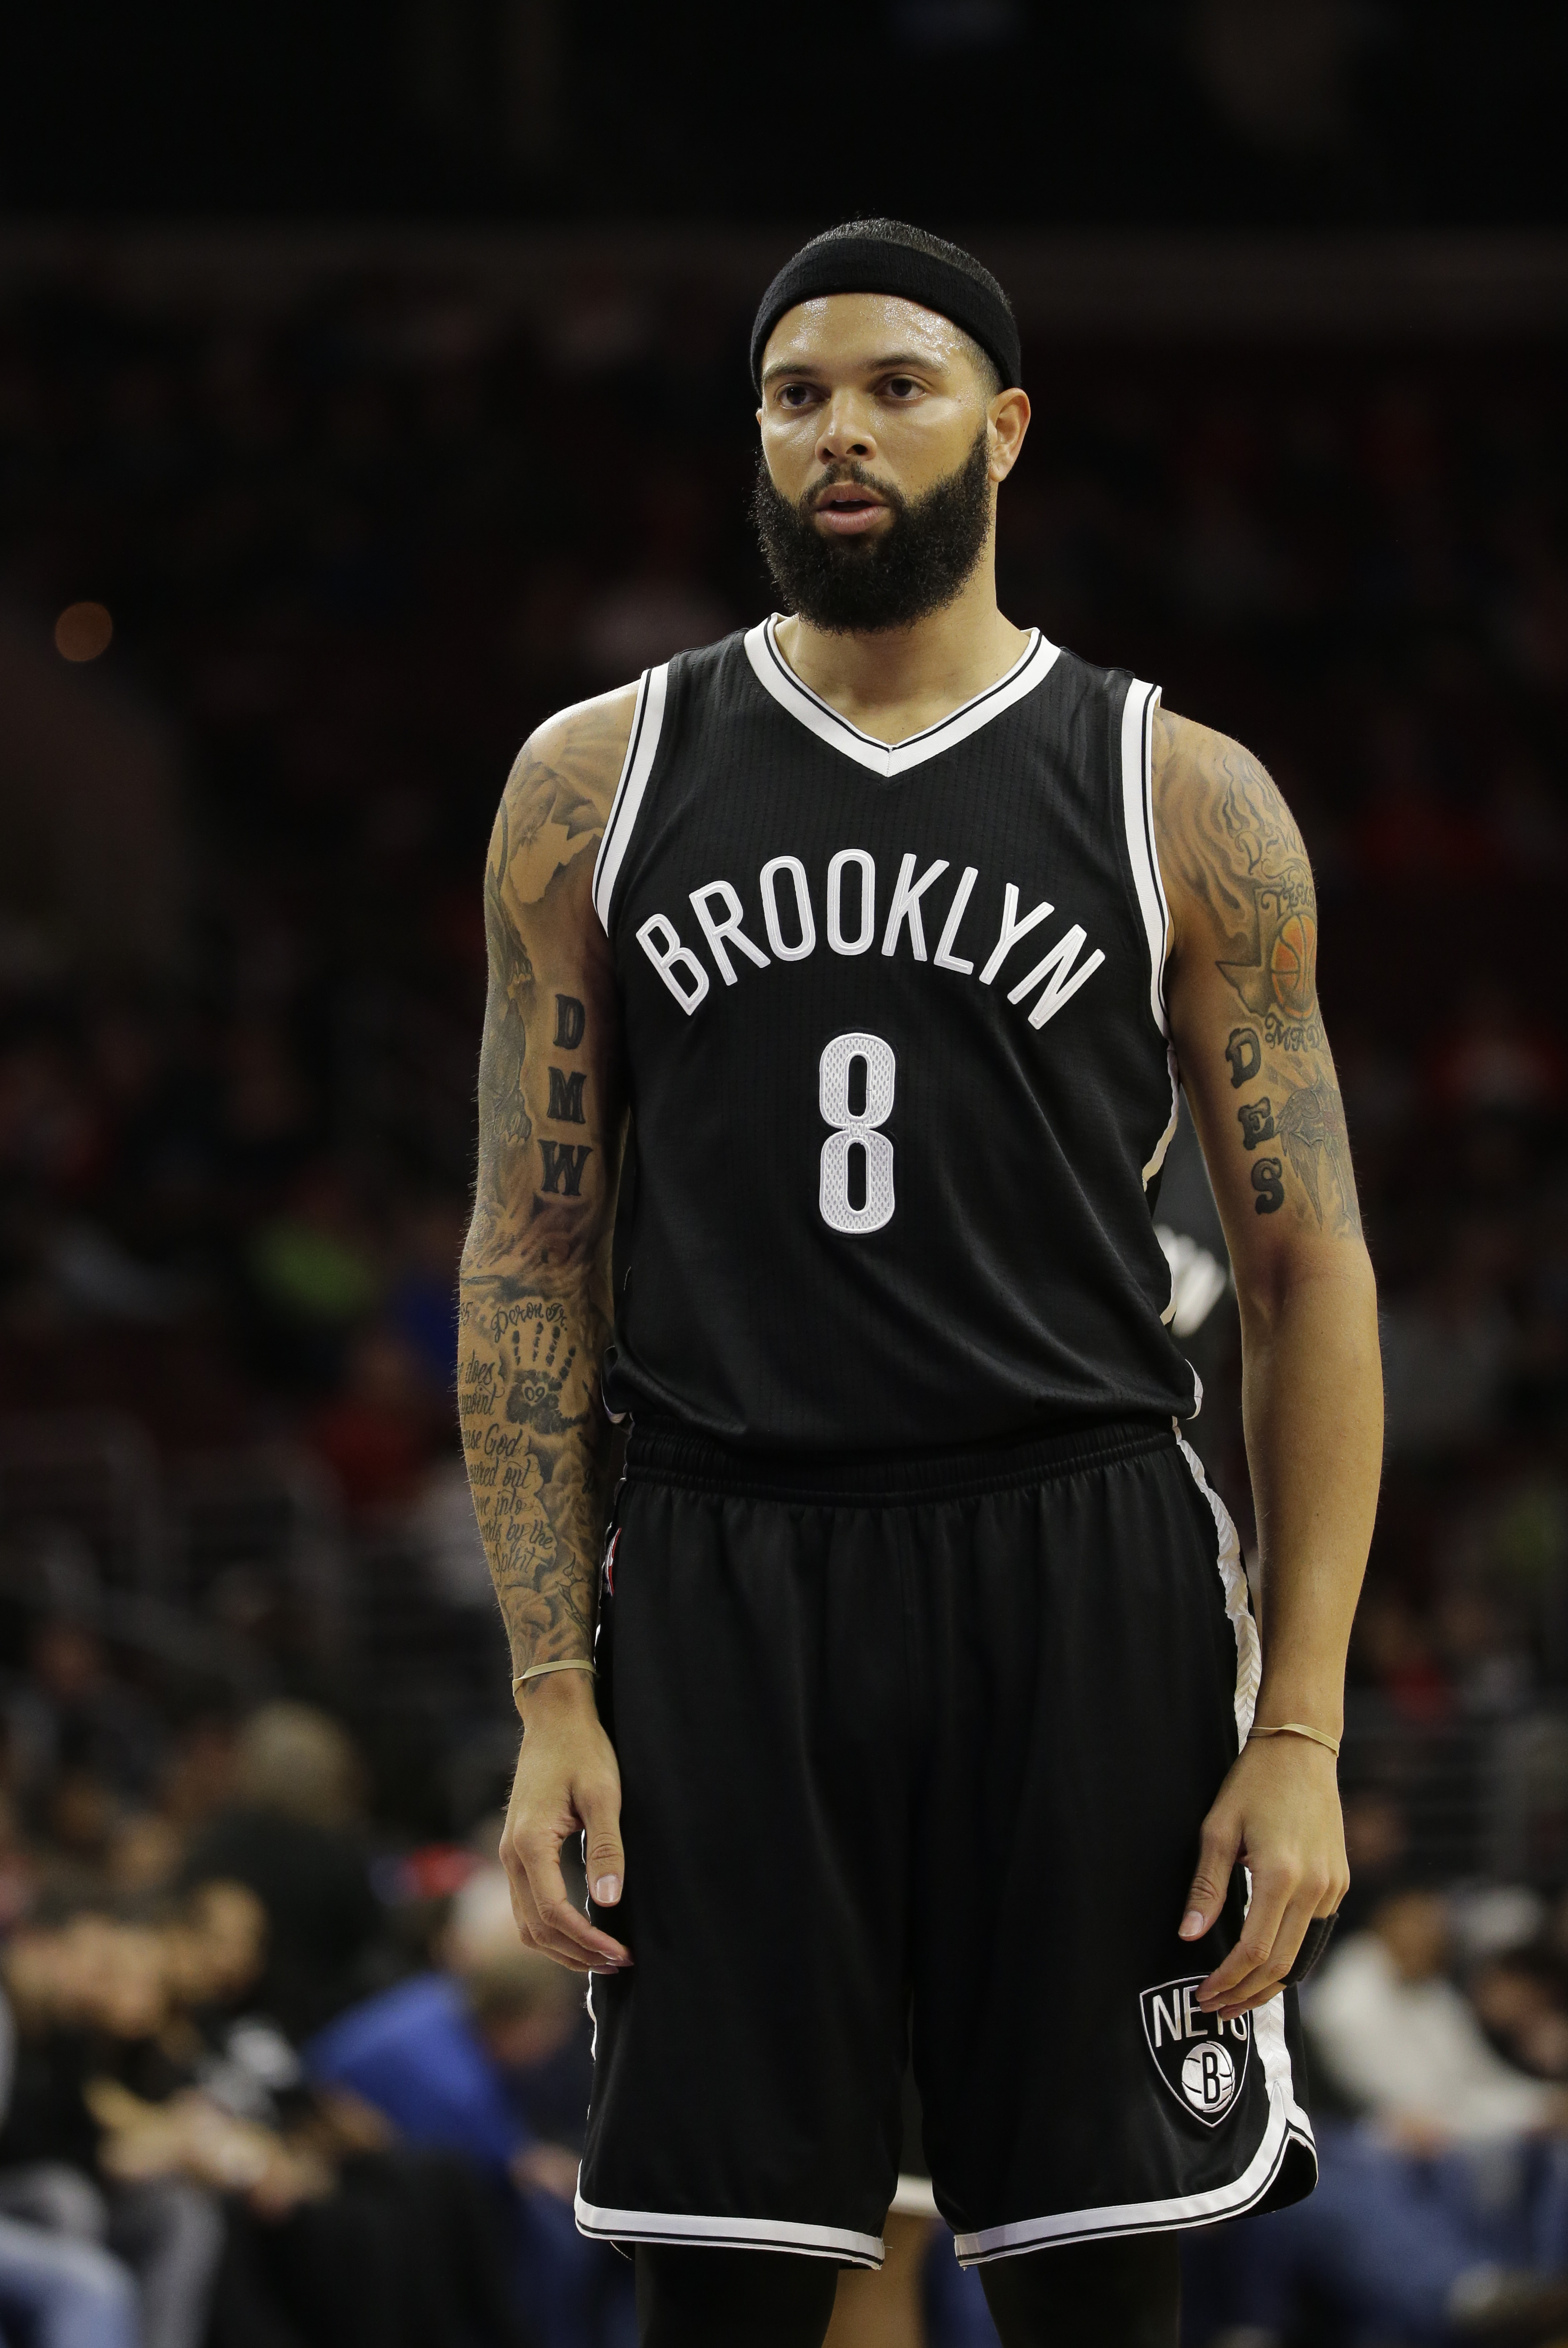 NBA notes: Deron Williams to join Mavs if he clears waivers | The